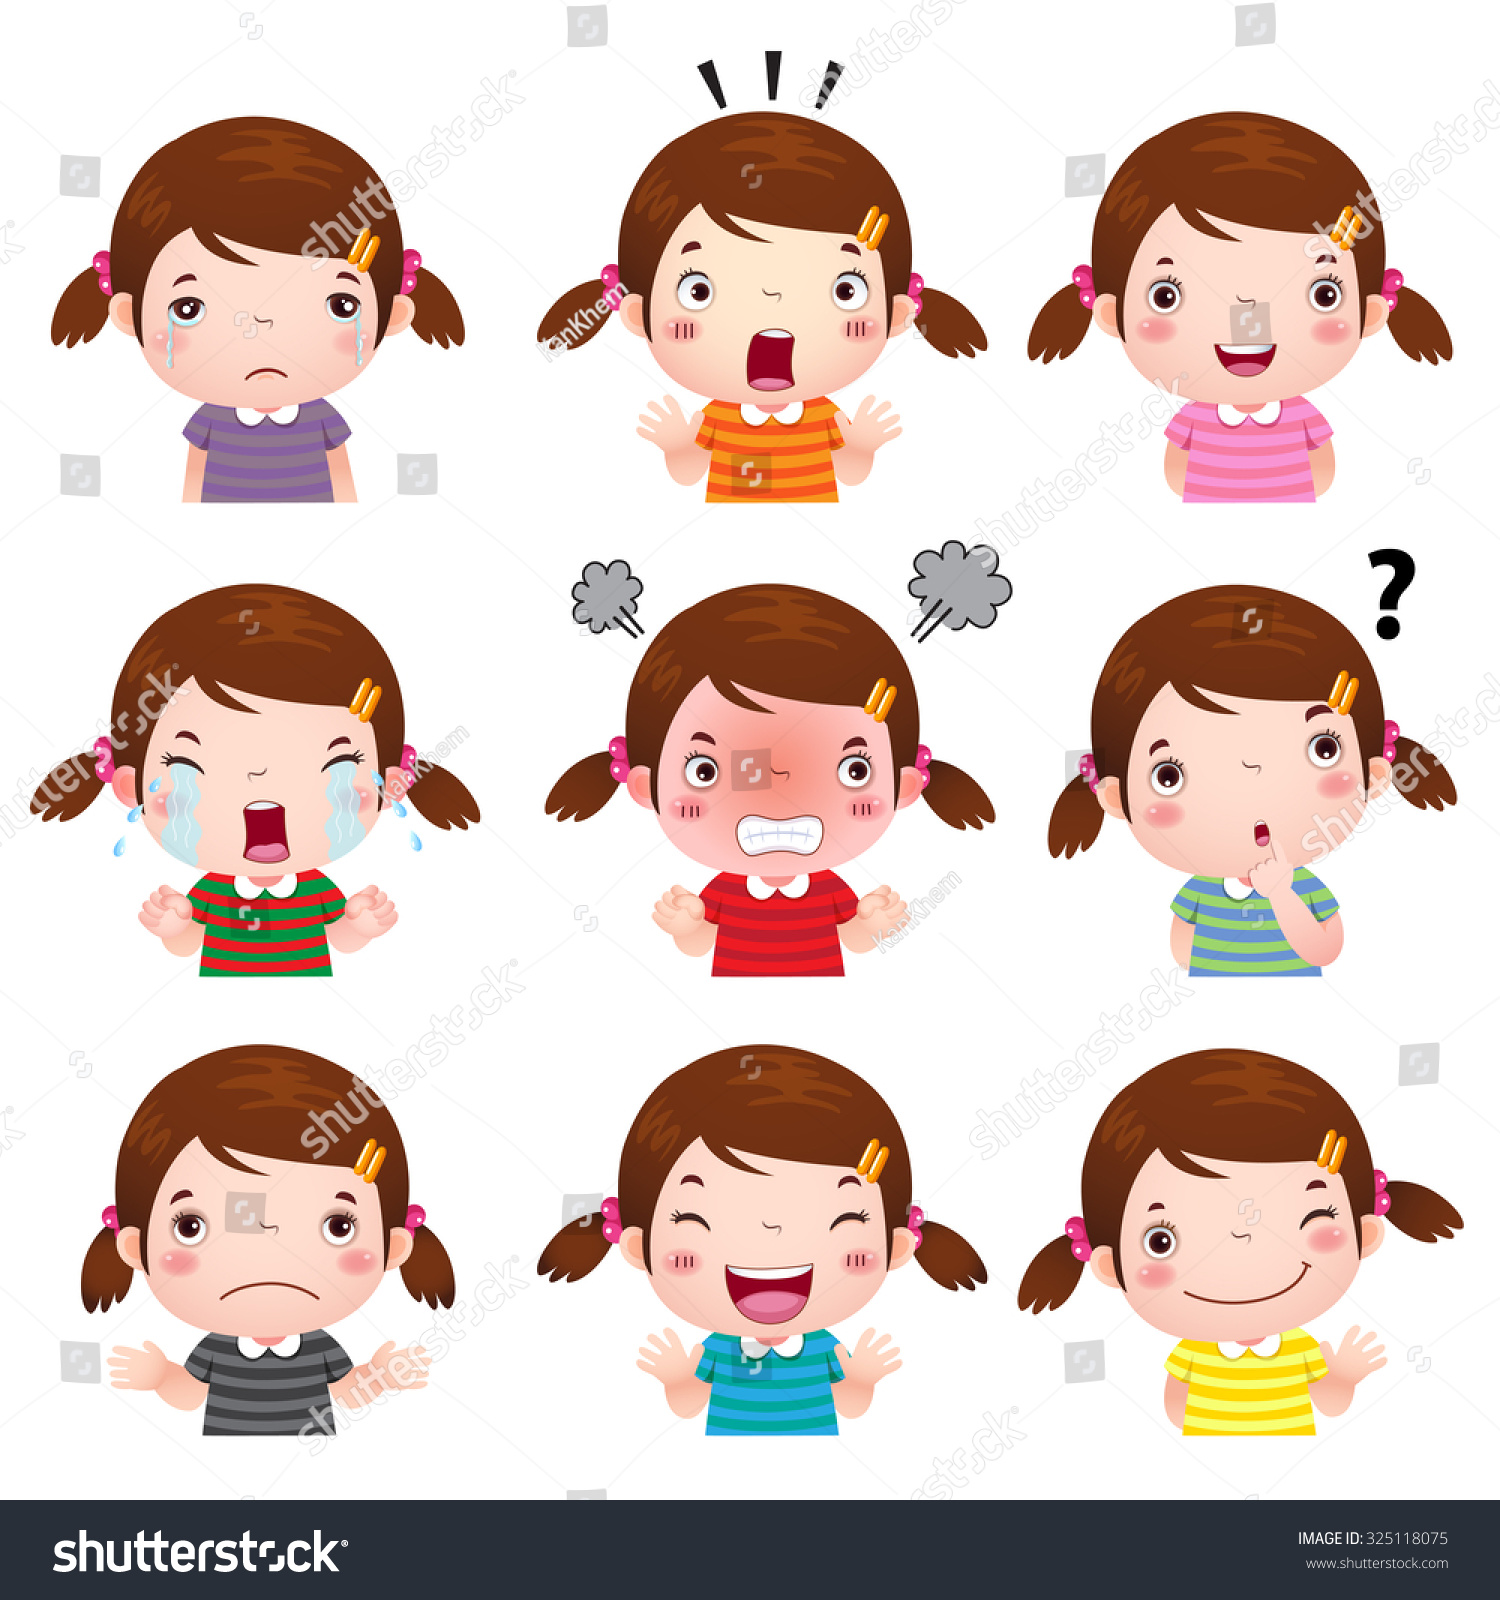 clipart of different emotions - photo #27